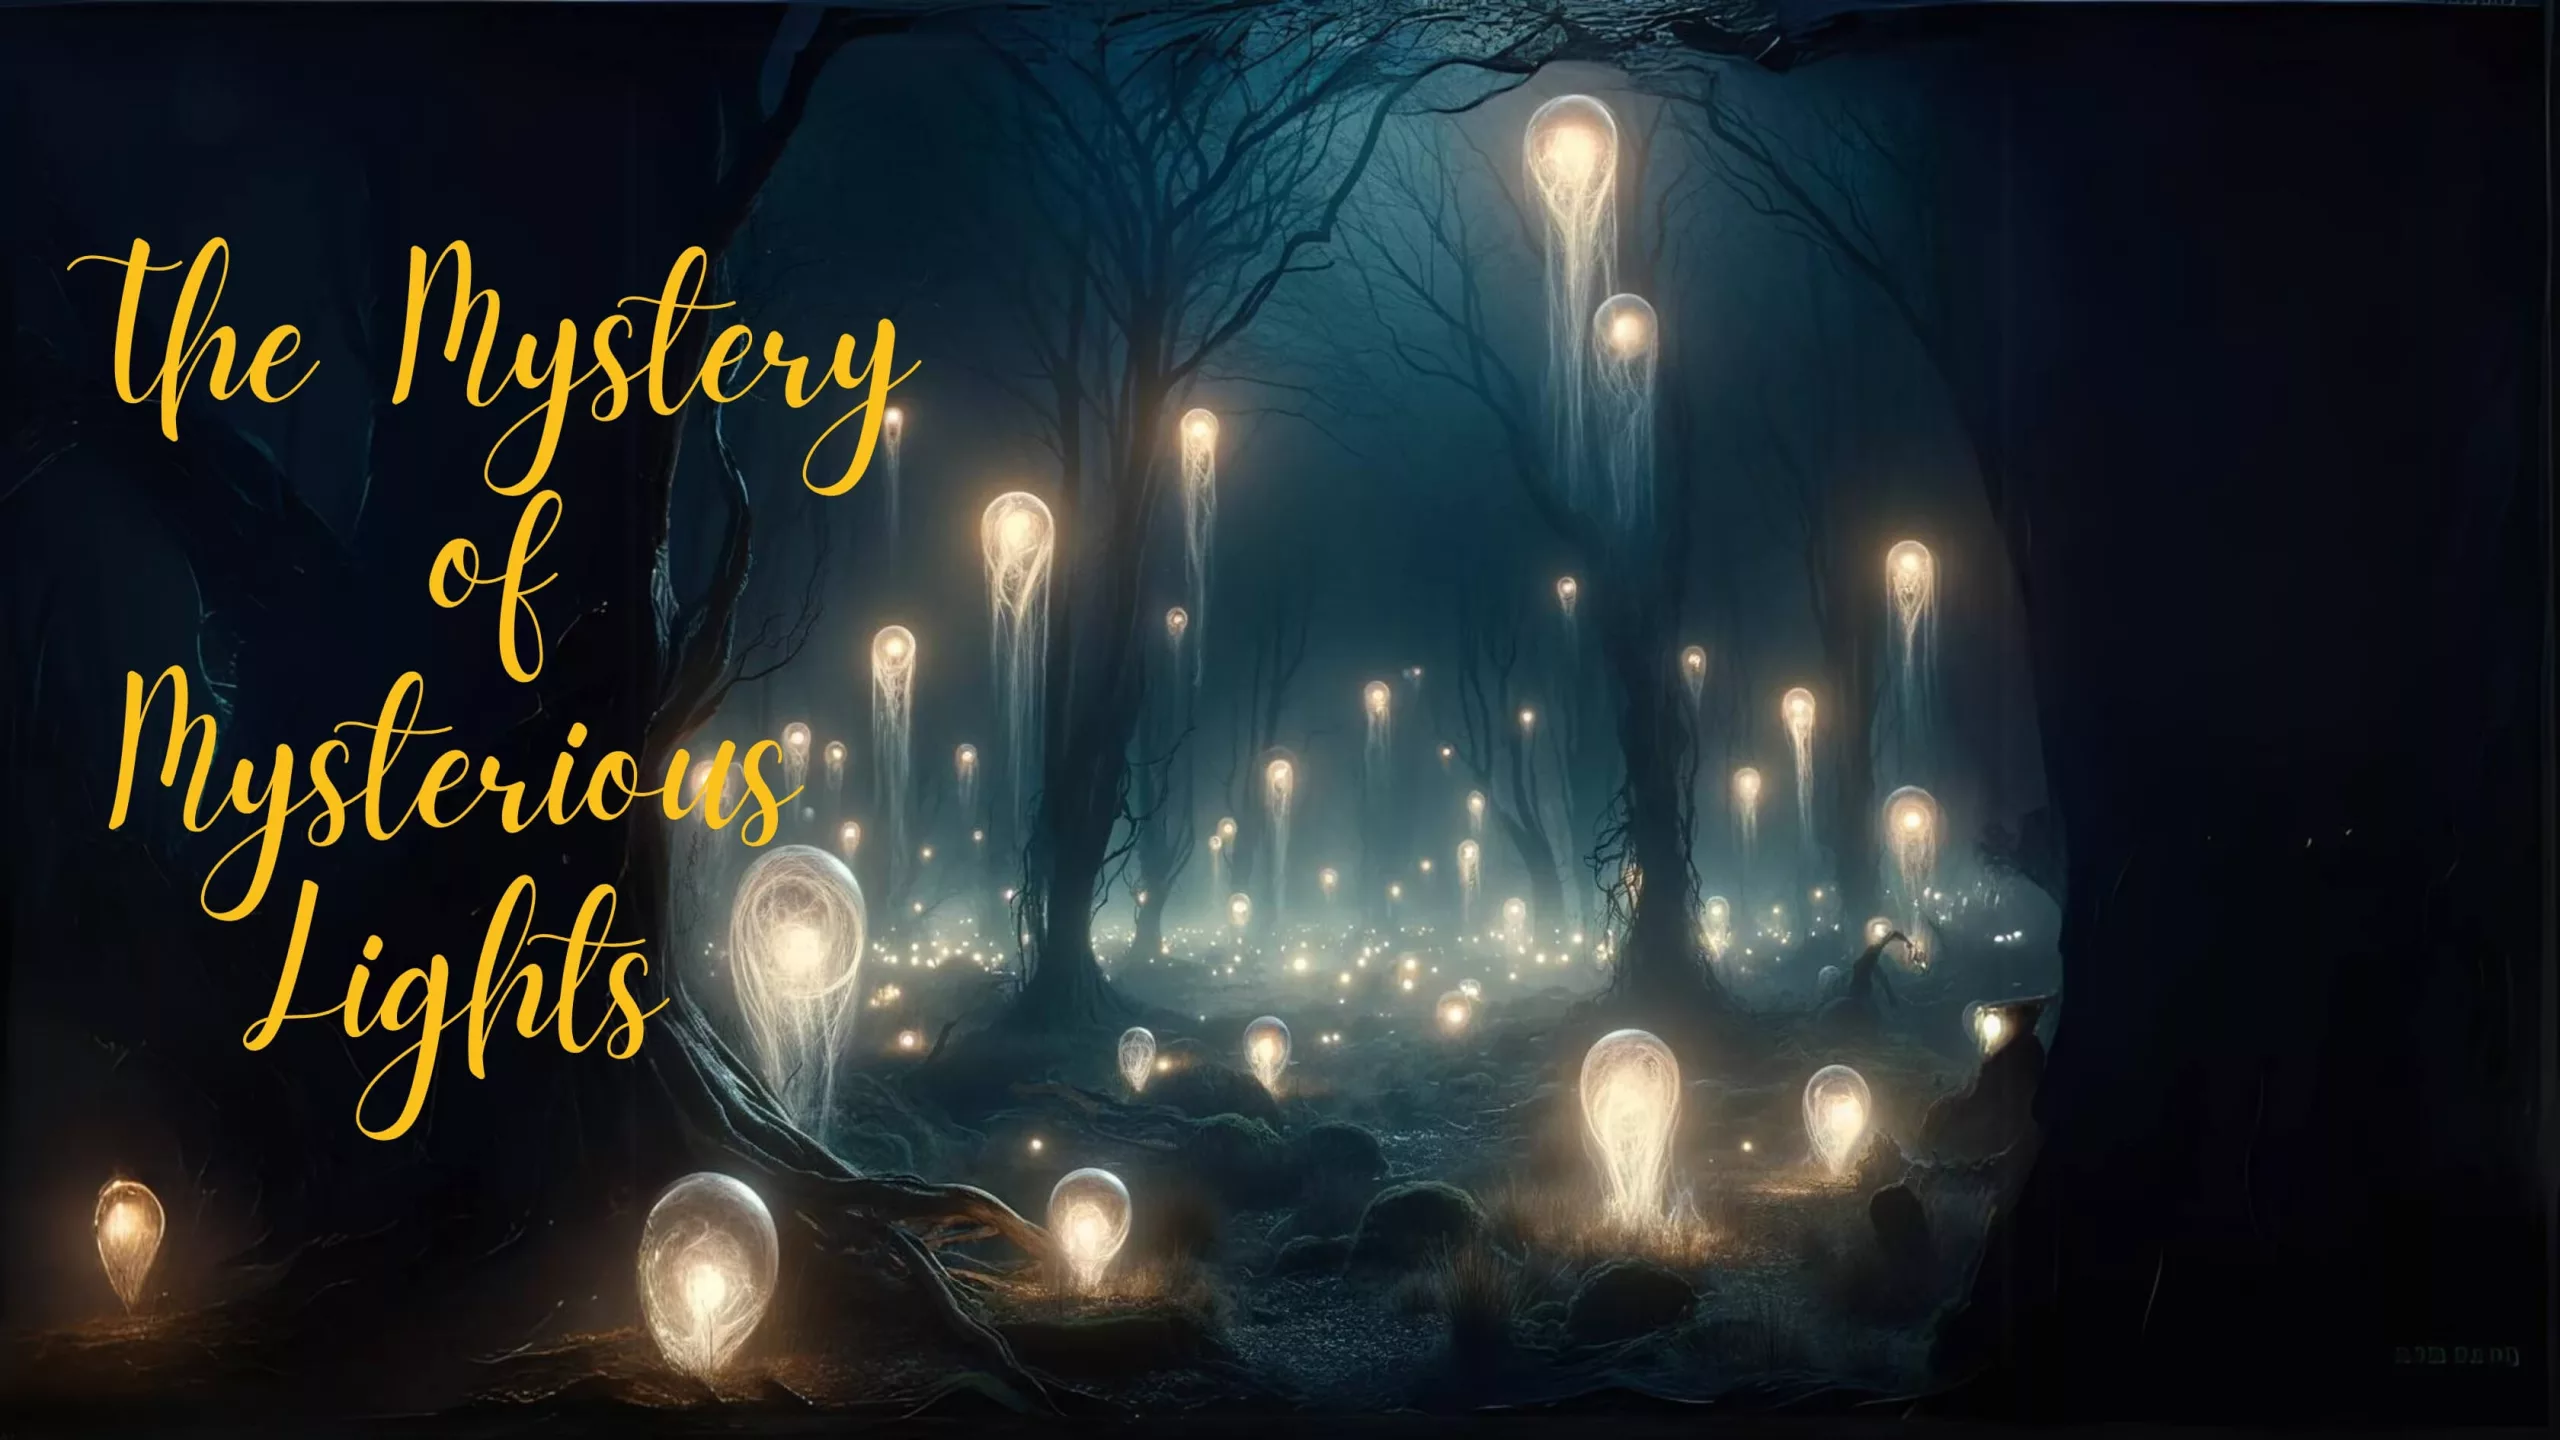 Myth 3: The Mystery of Mysterious Lights